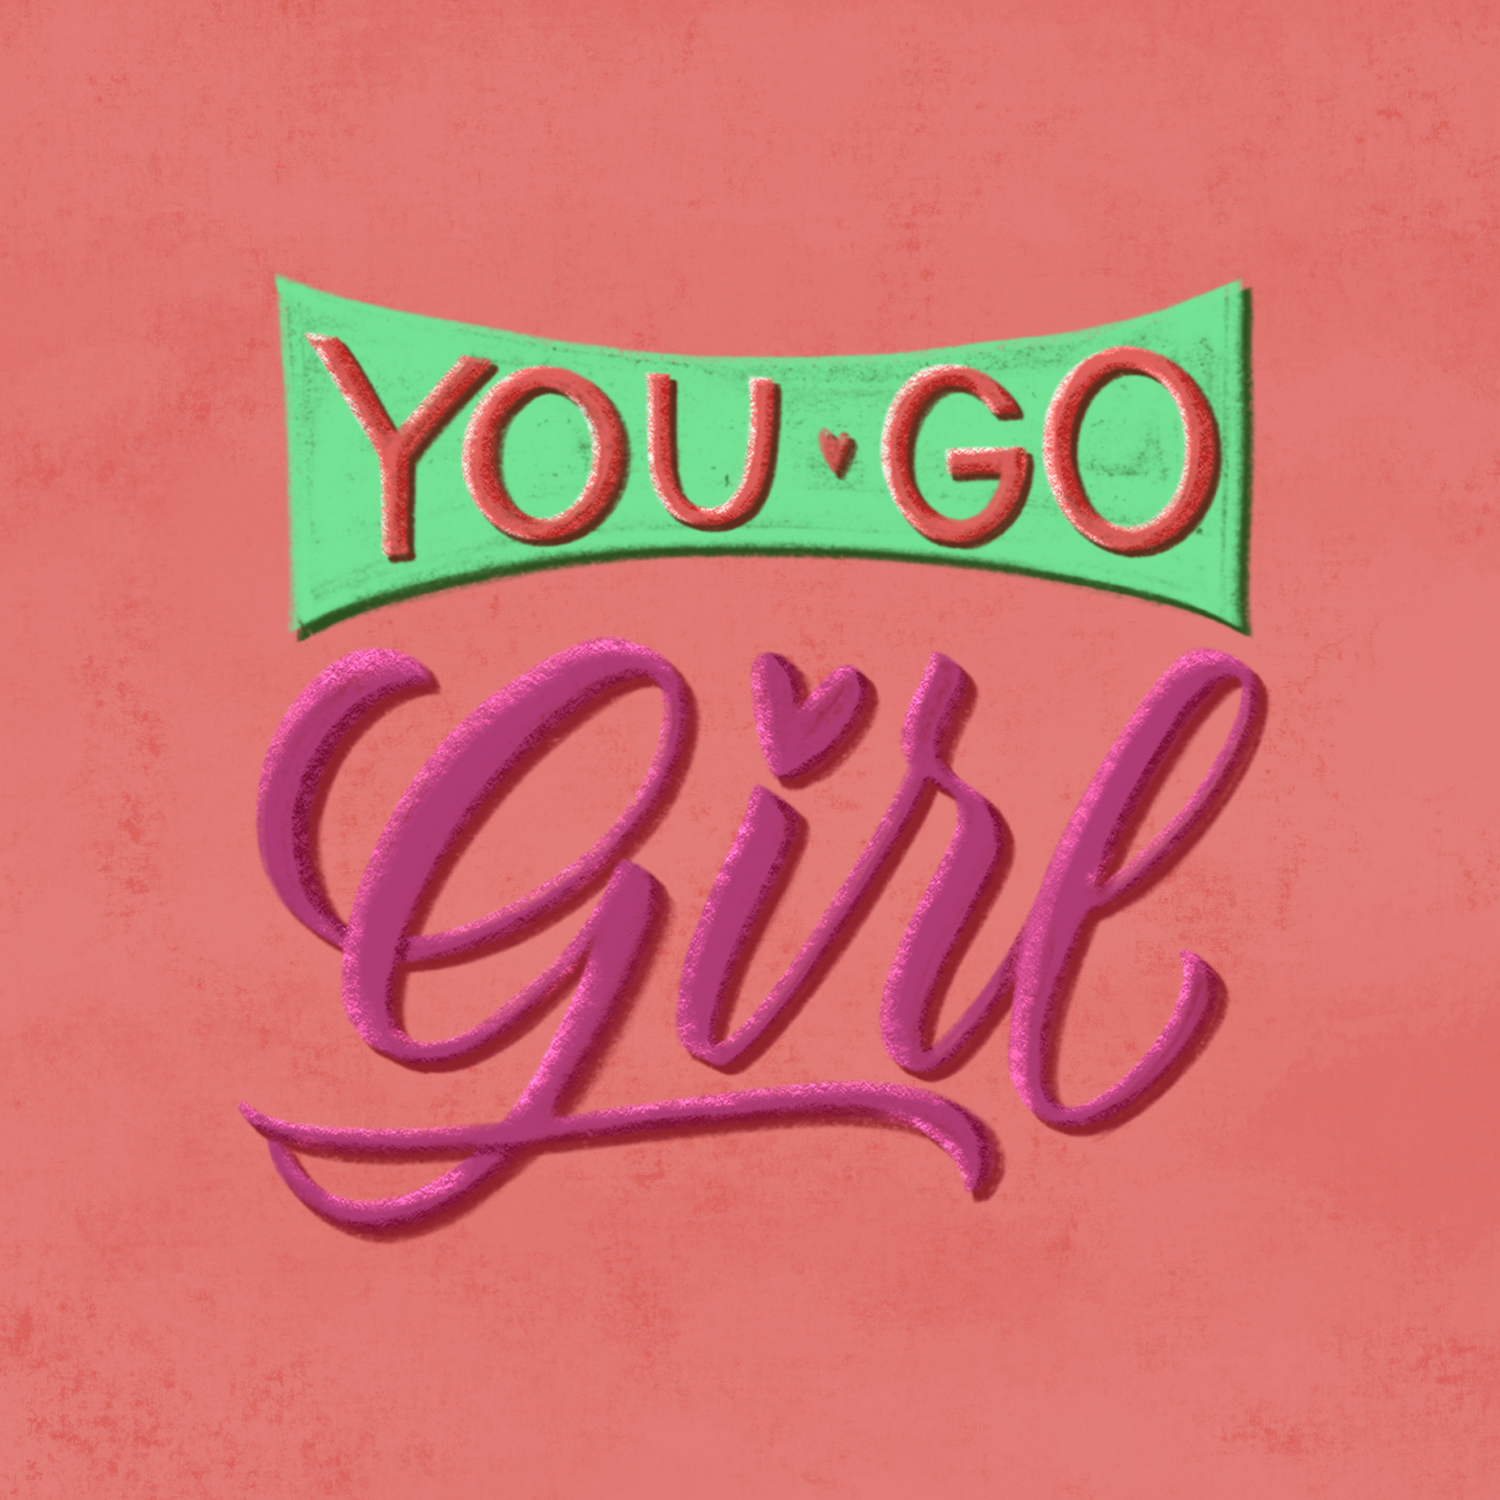 You go girl-pink background